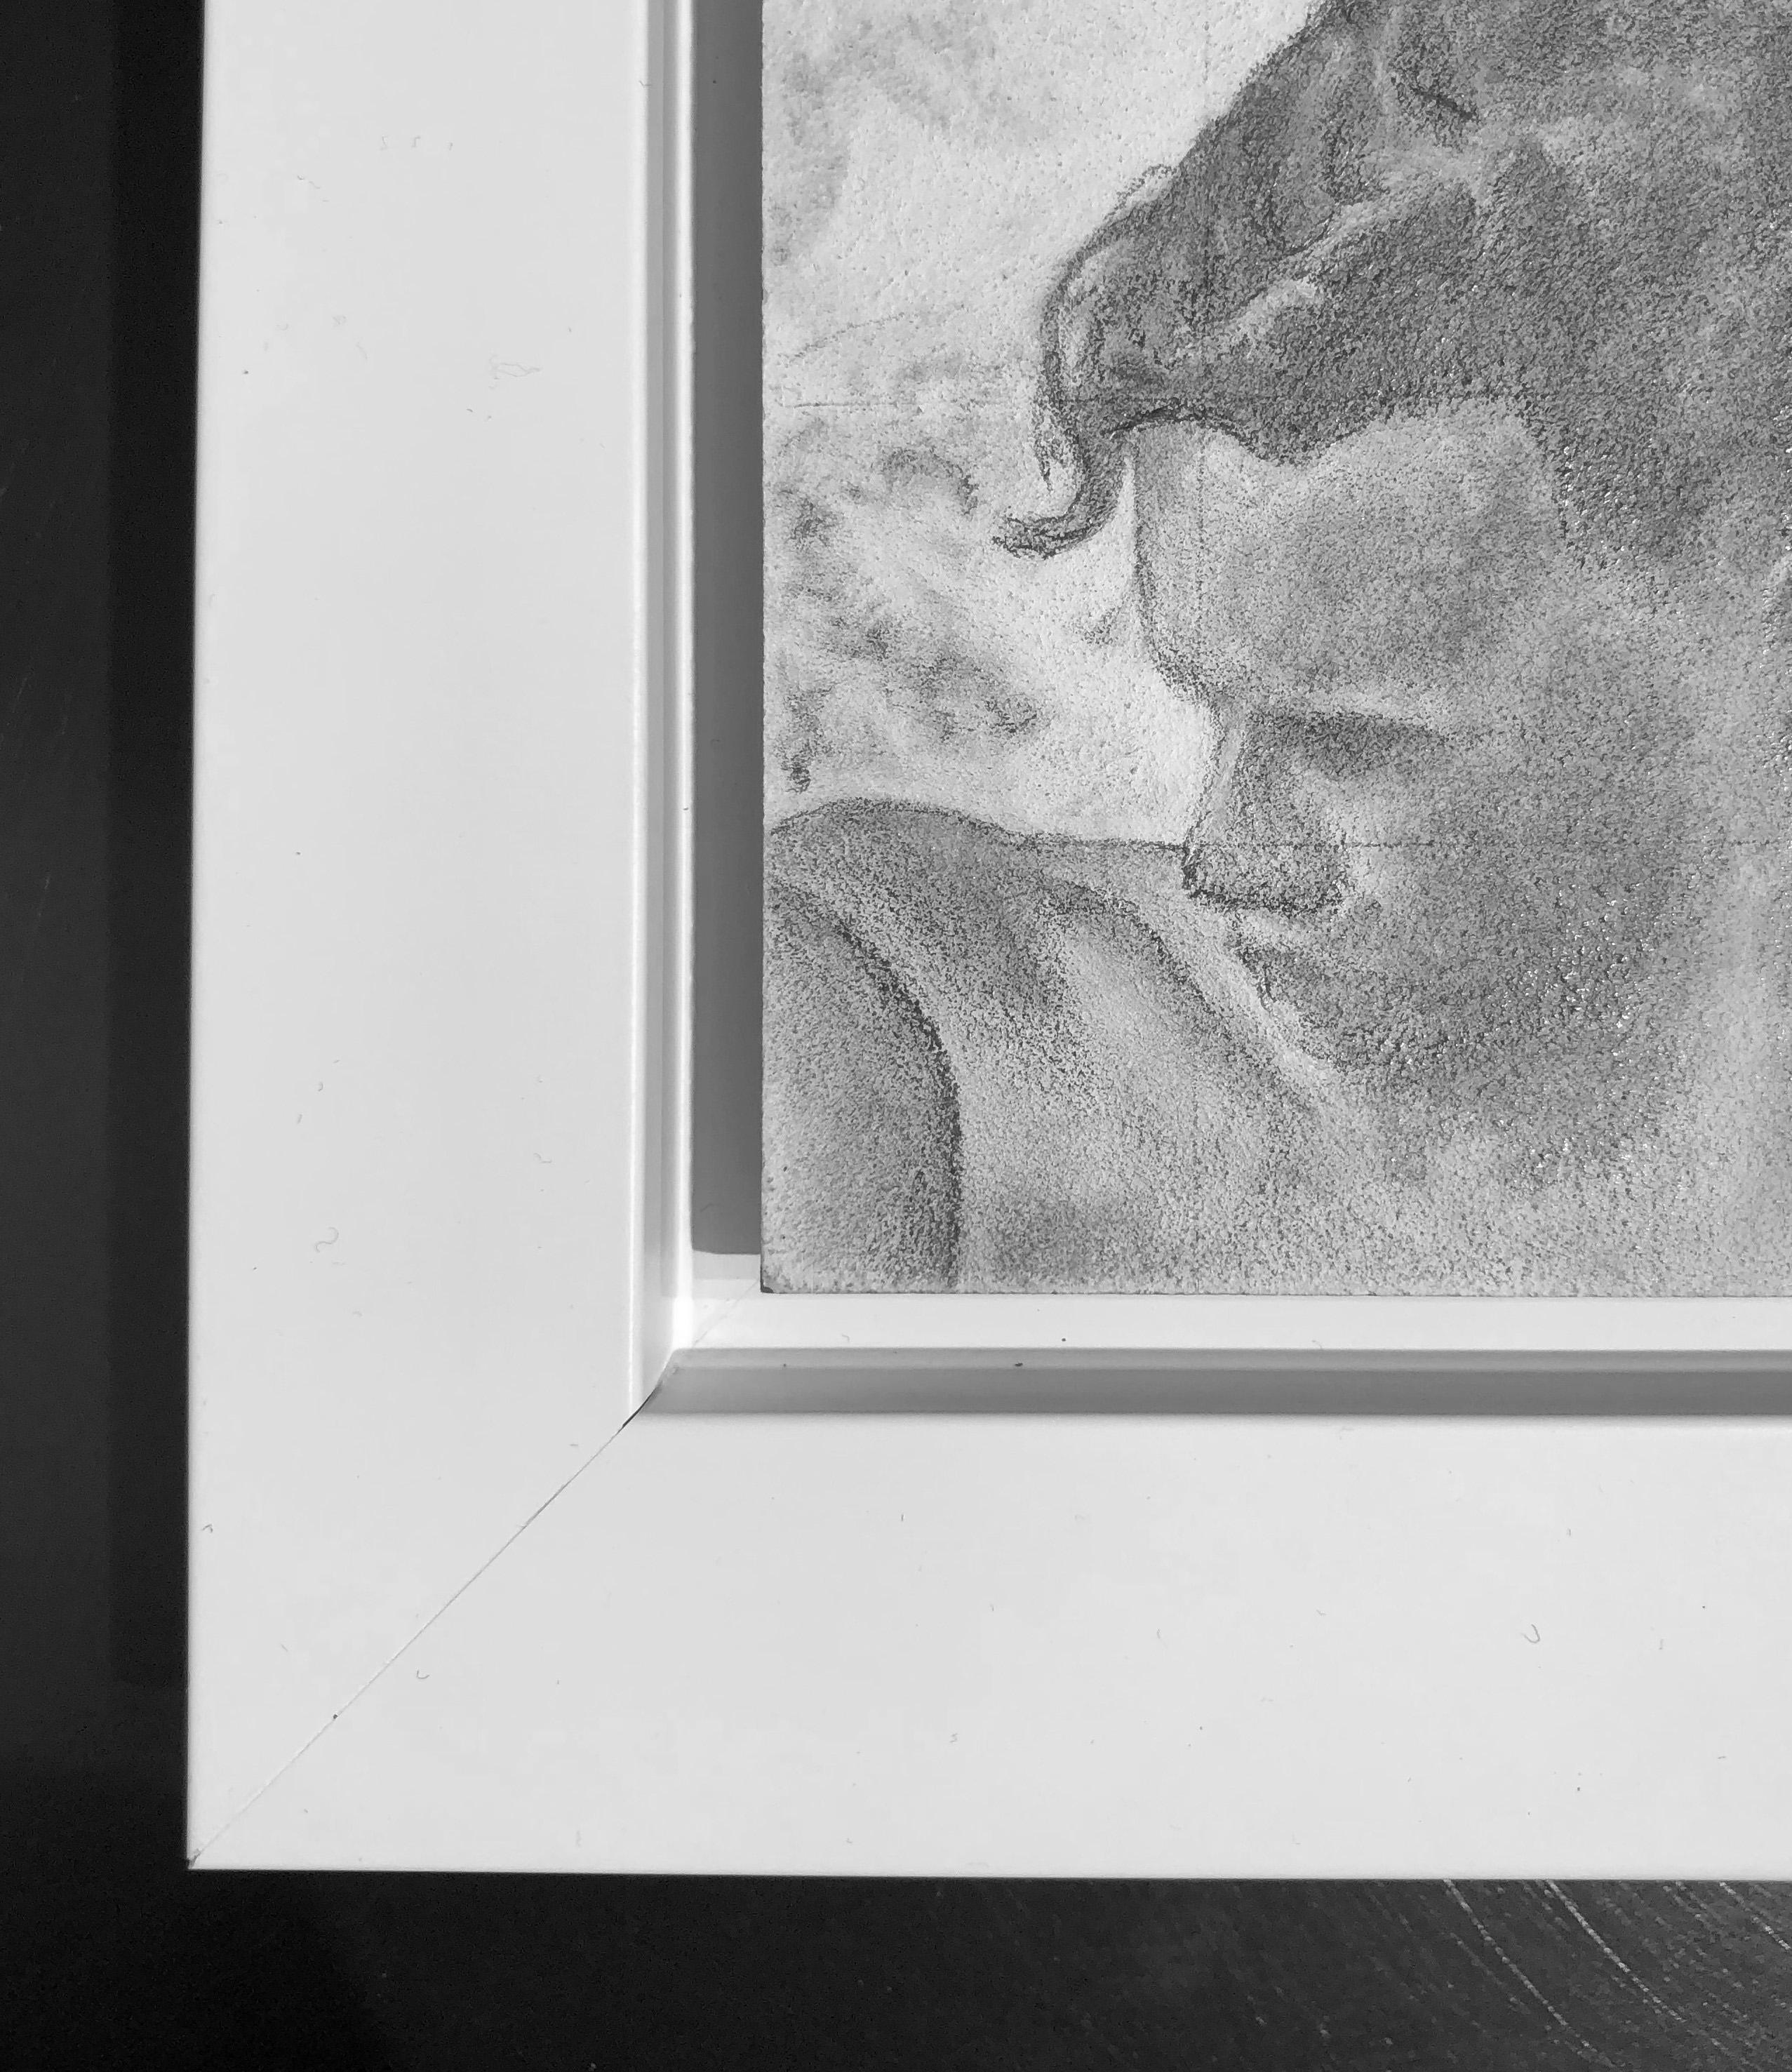 Reticent - Original Graphite Drawing on Panel, Two People at the Beach Circa '50 - Contemporary Art by Rick Sindt